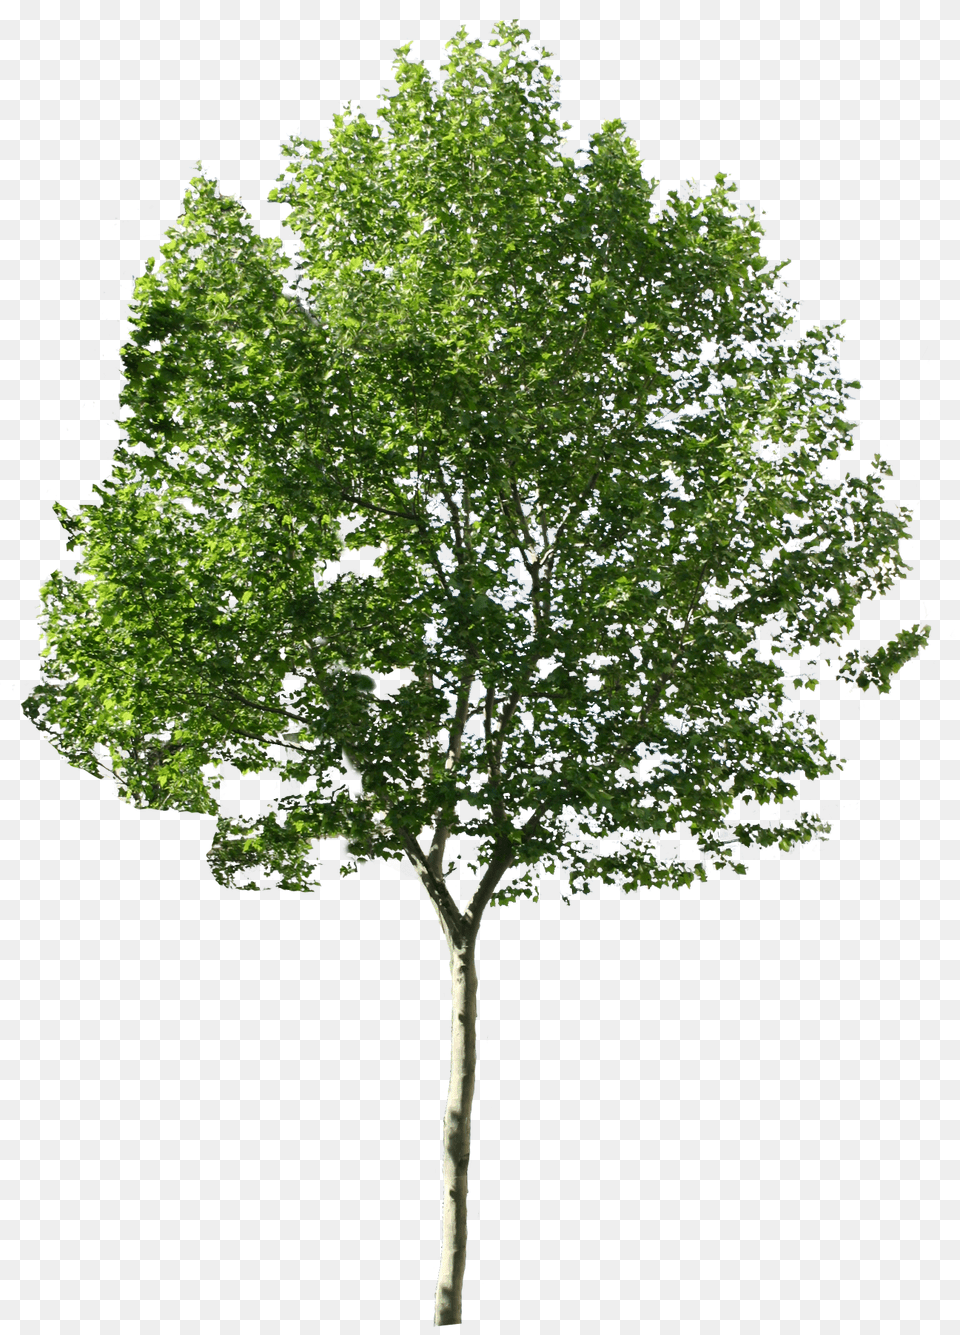 Architecture Trees U0026 Clipart Download Ywd Tree Photoshop, Maple, Oak, Plant, Sycamore Free Transparent Png